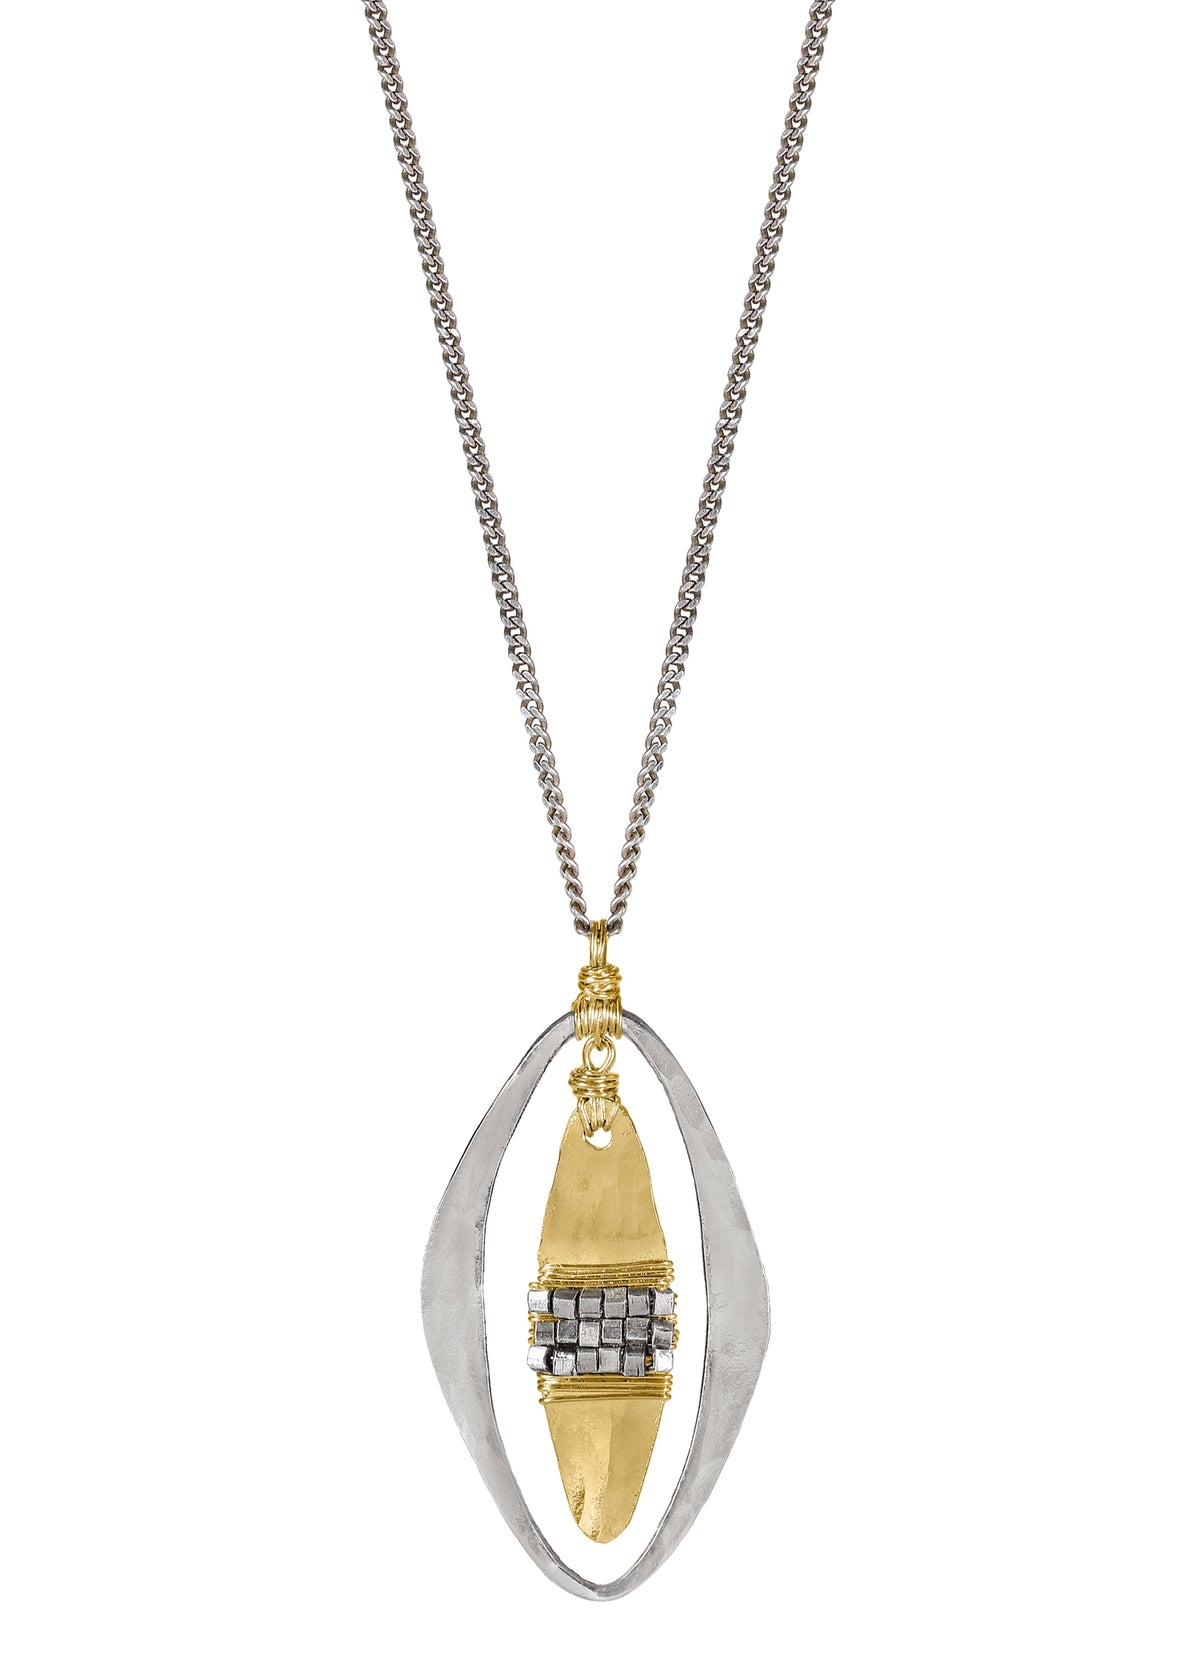 14k gold fill Sterling silver Necklace measures 17-1/8&quot; in length Pendant measures 1&quot; in length and 5/8&quot; in width at the widest point Handmade in our Los Angeles studio